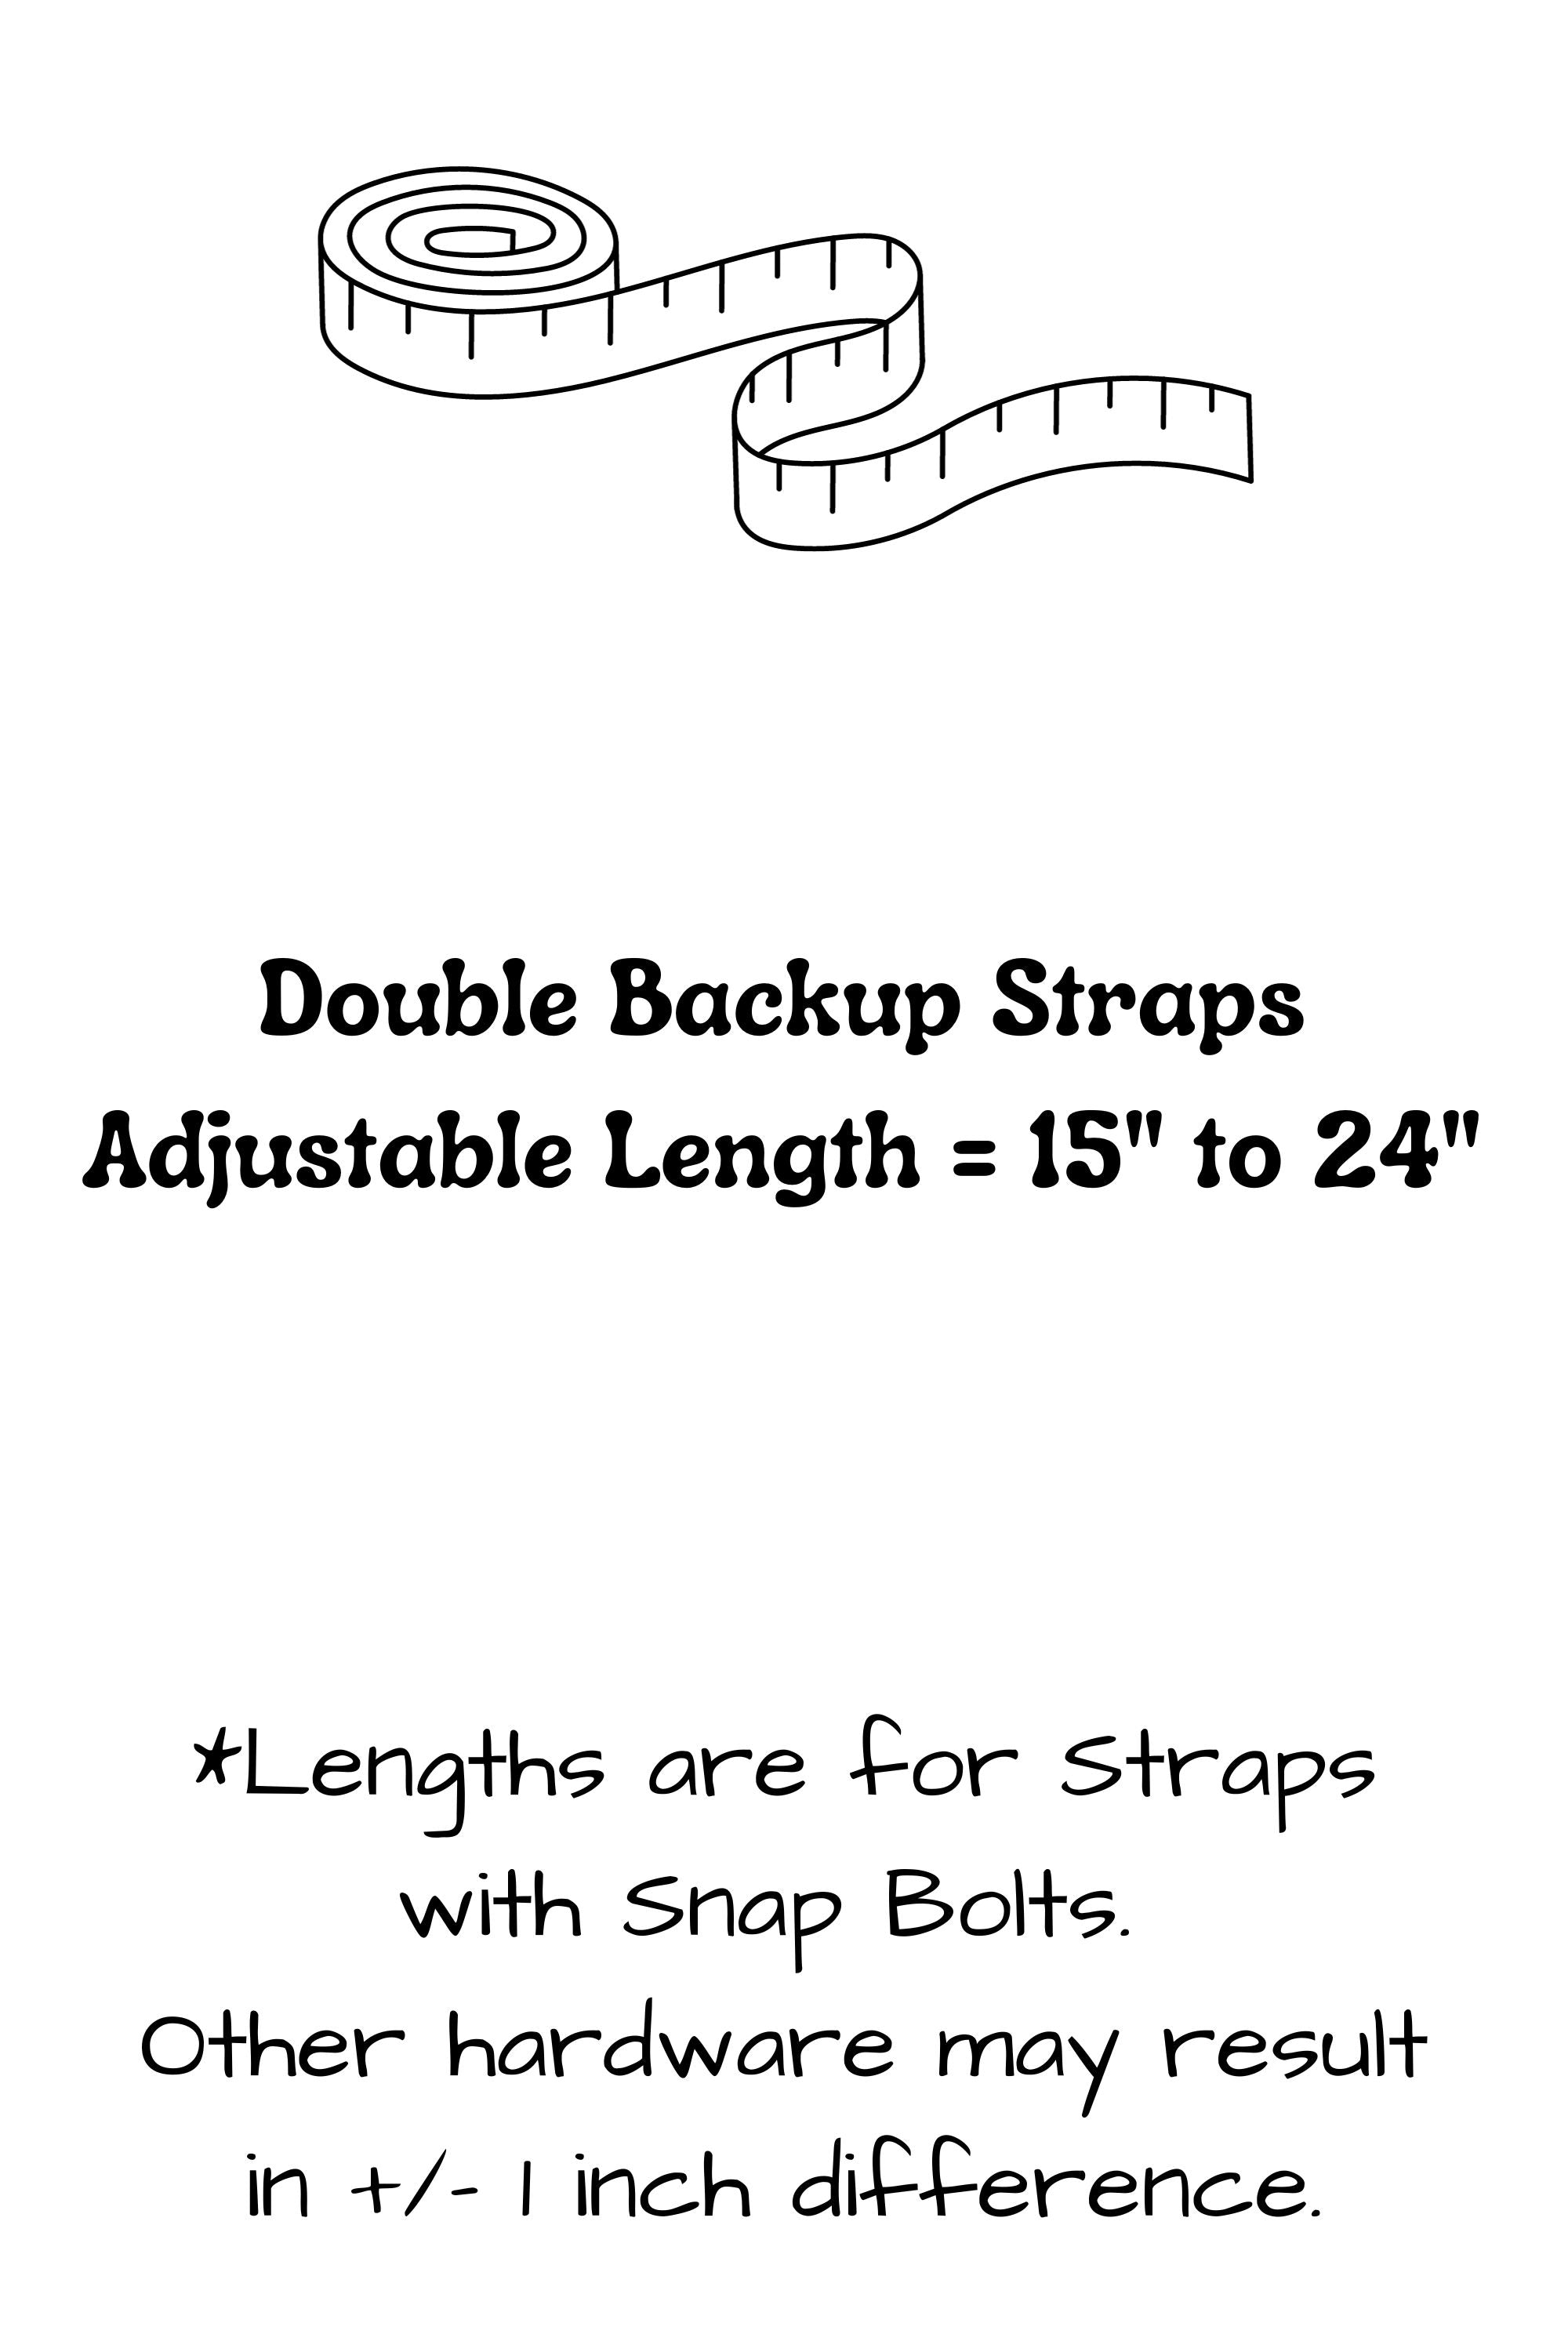 Double backup straps have two segments, each are adjustable from 15 inches to 24 inches. Lengths are for straps with snap bolts, other hardware may result in a slight difference in length.